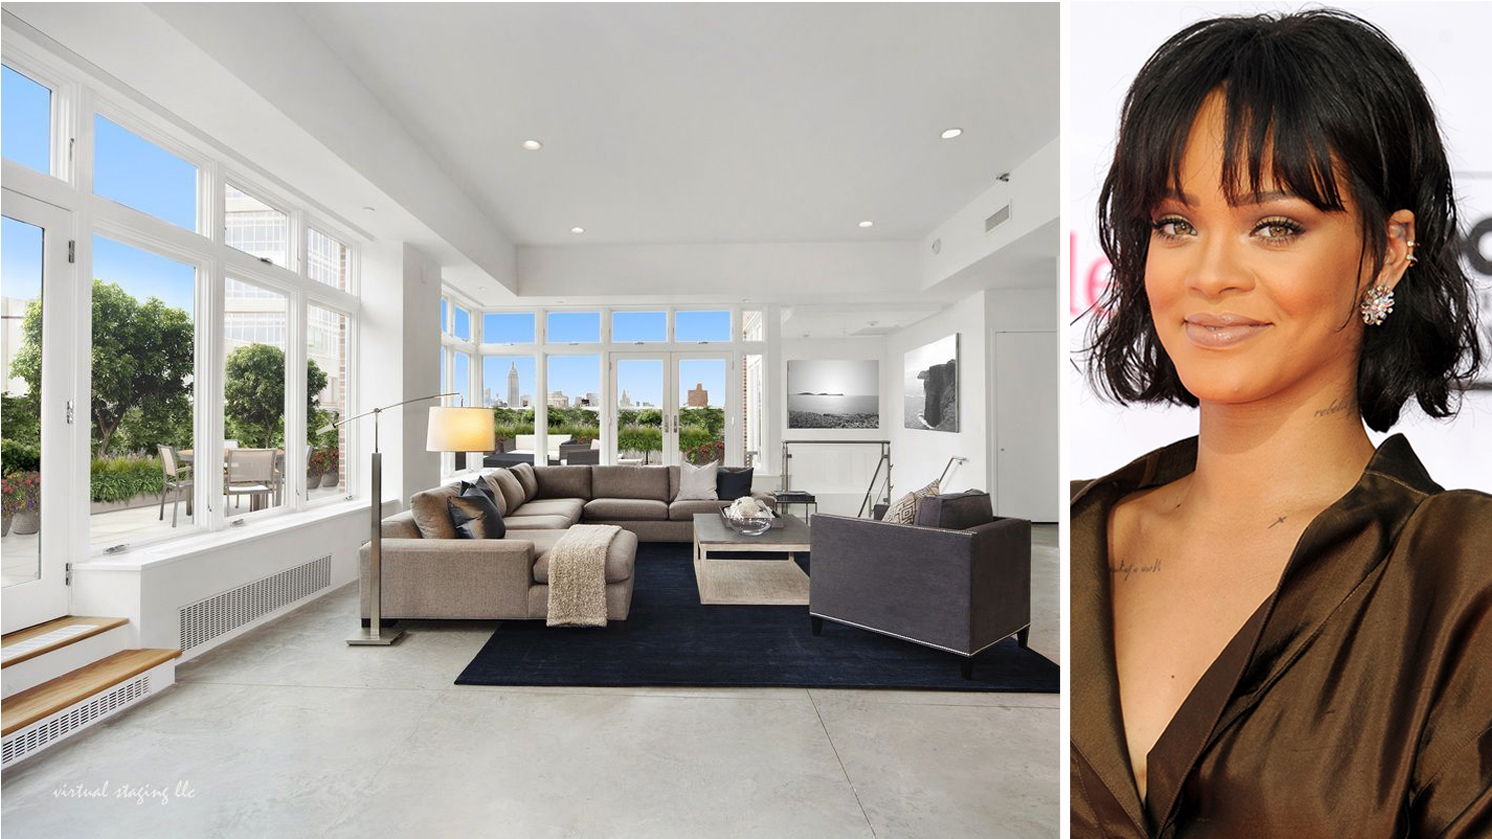 image of Rihanna and the interior of her chinatown loft